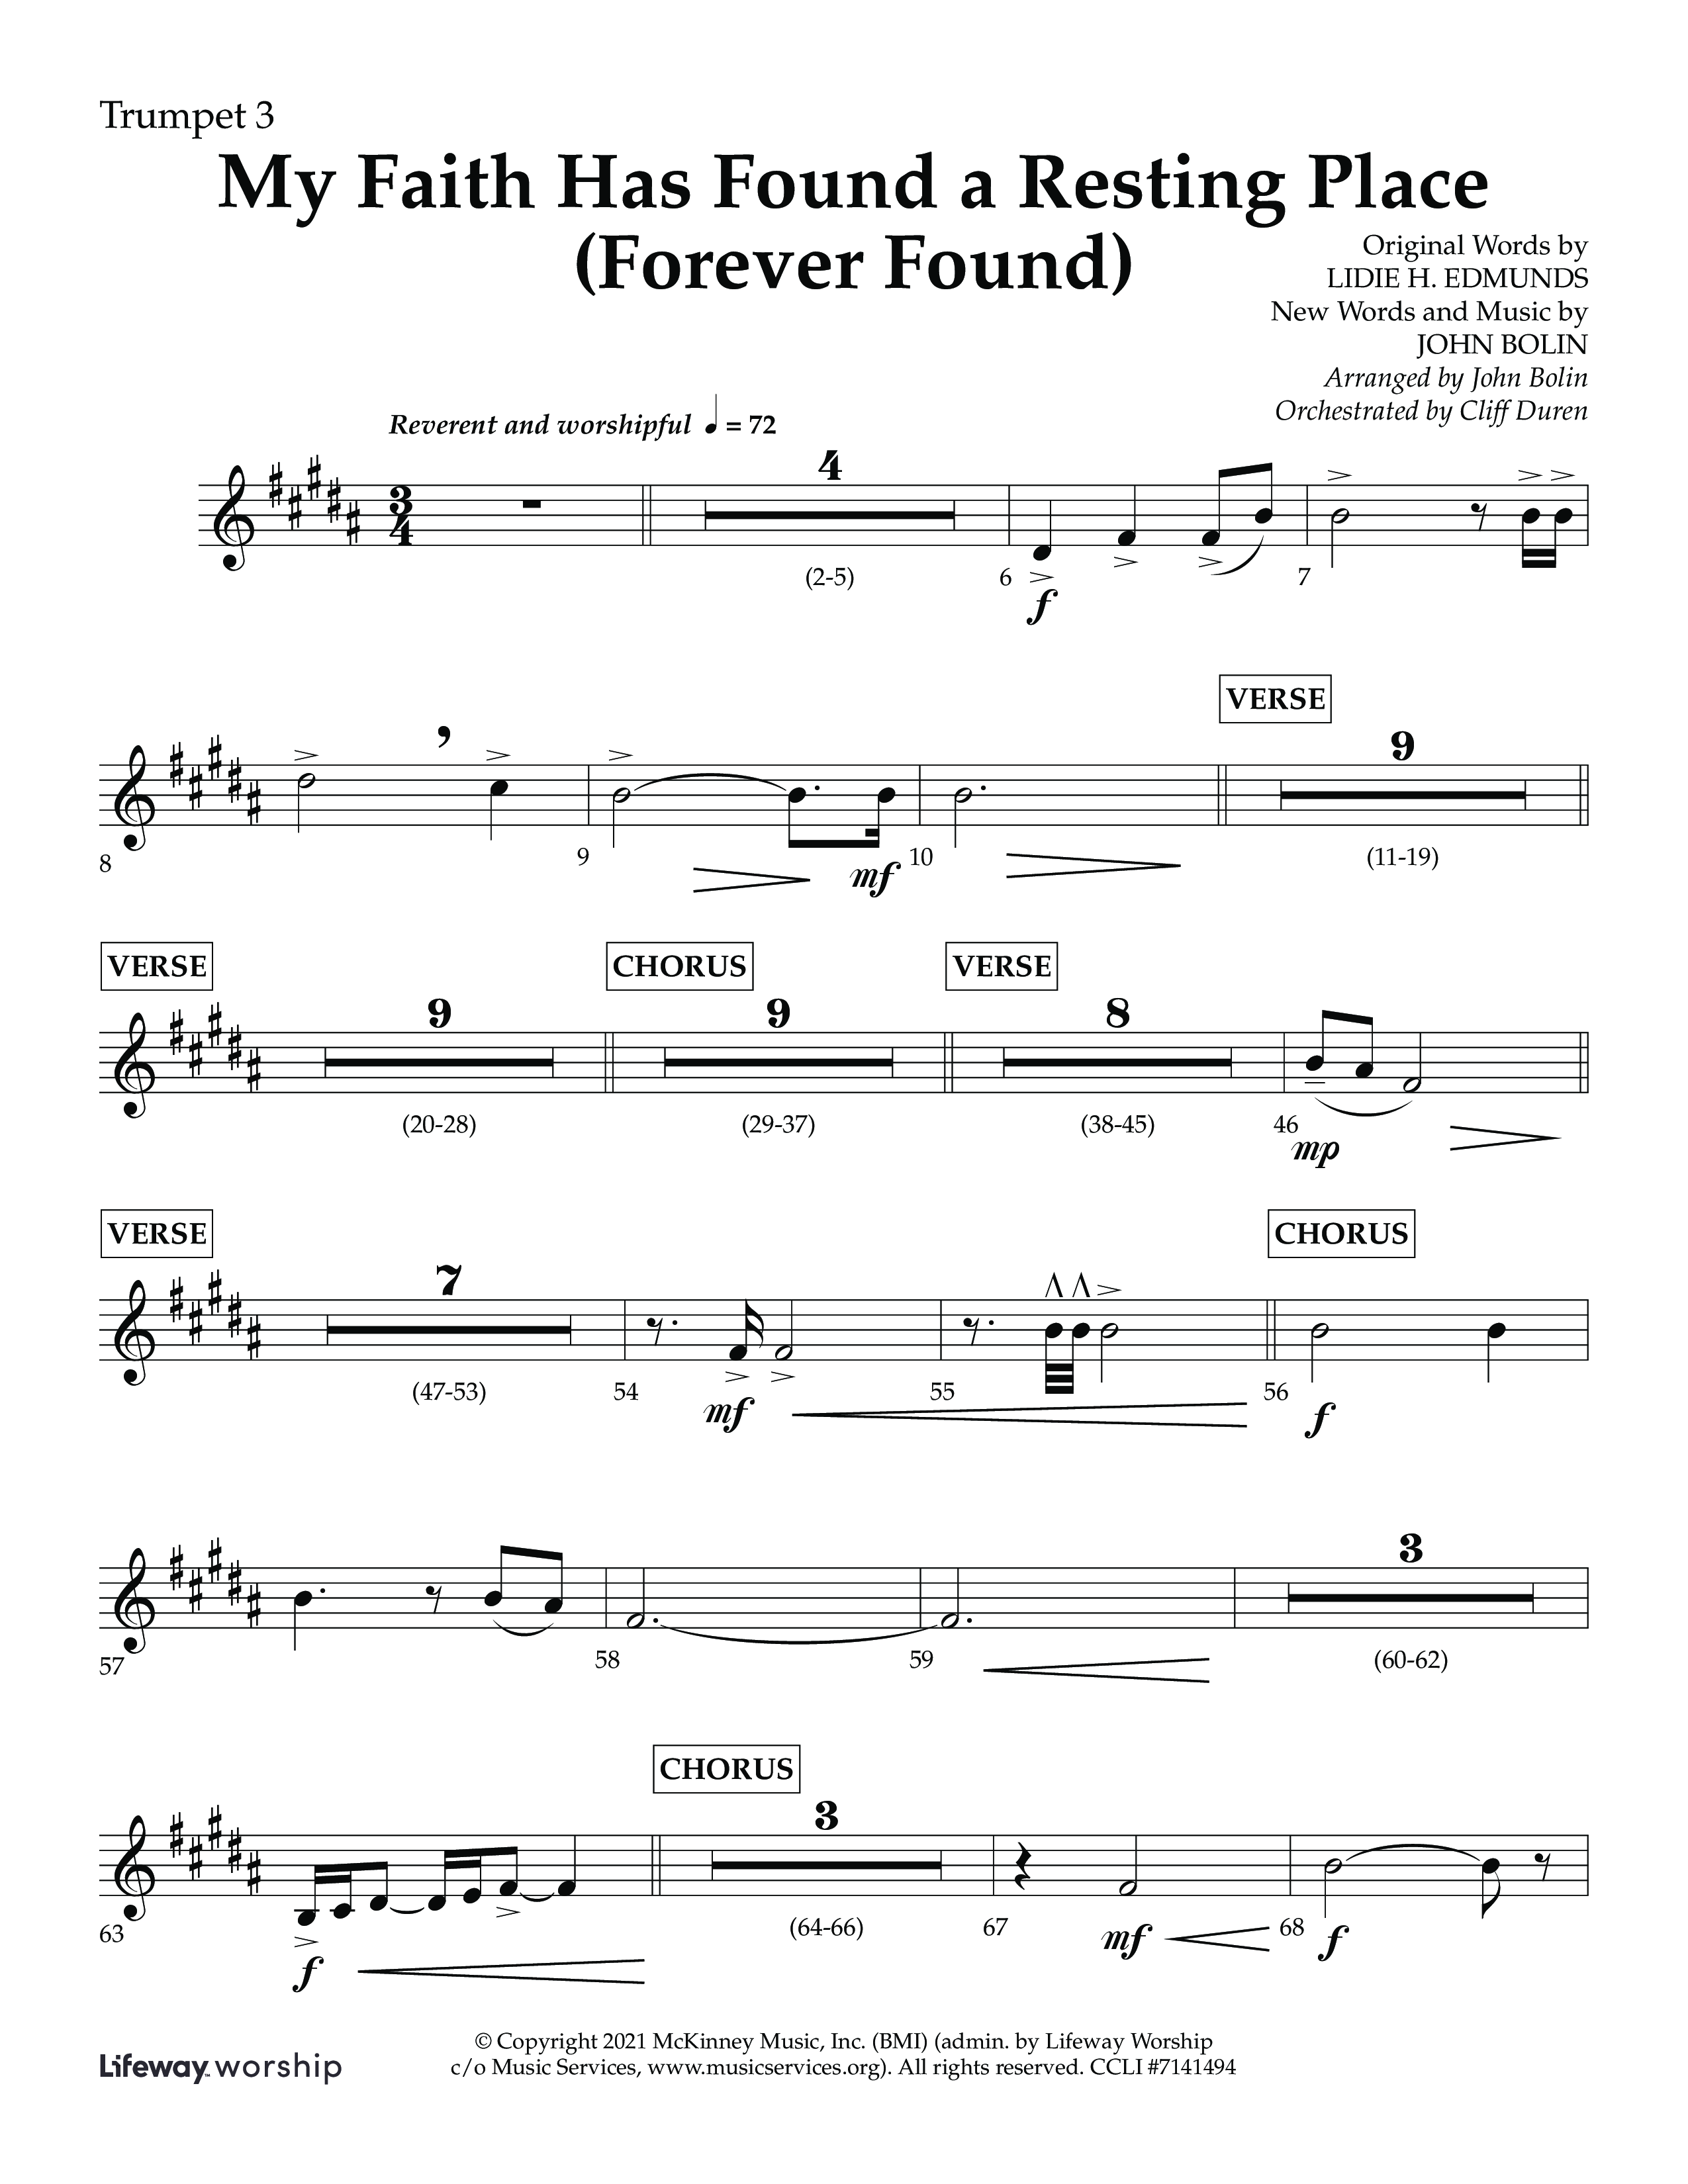 My Faith Has Found a Resting Place (Forever Found) (Choral Anthem SATB) Trumpet 3 (Lifeway Choral / Arr. John Bolin / Orch. Cliff Duren)